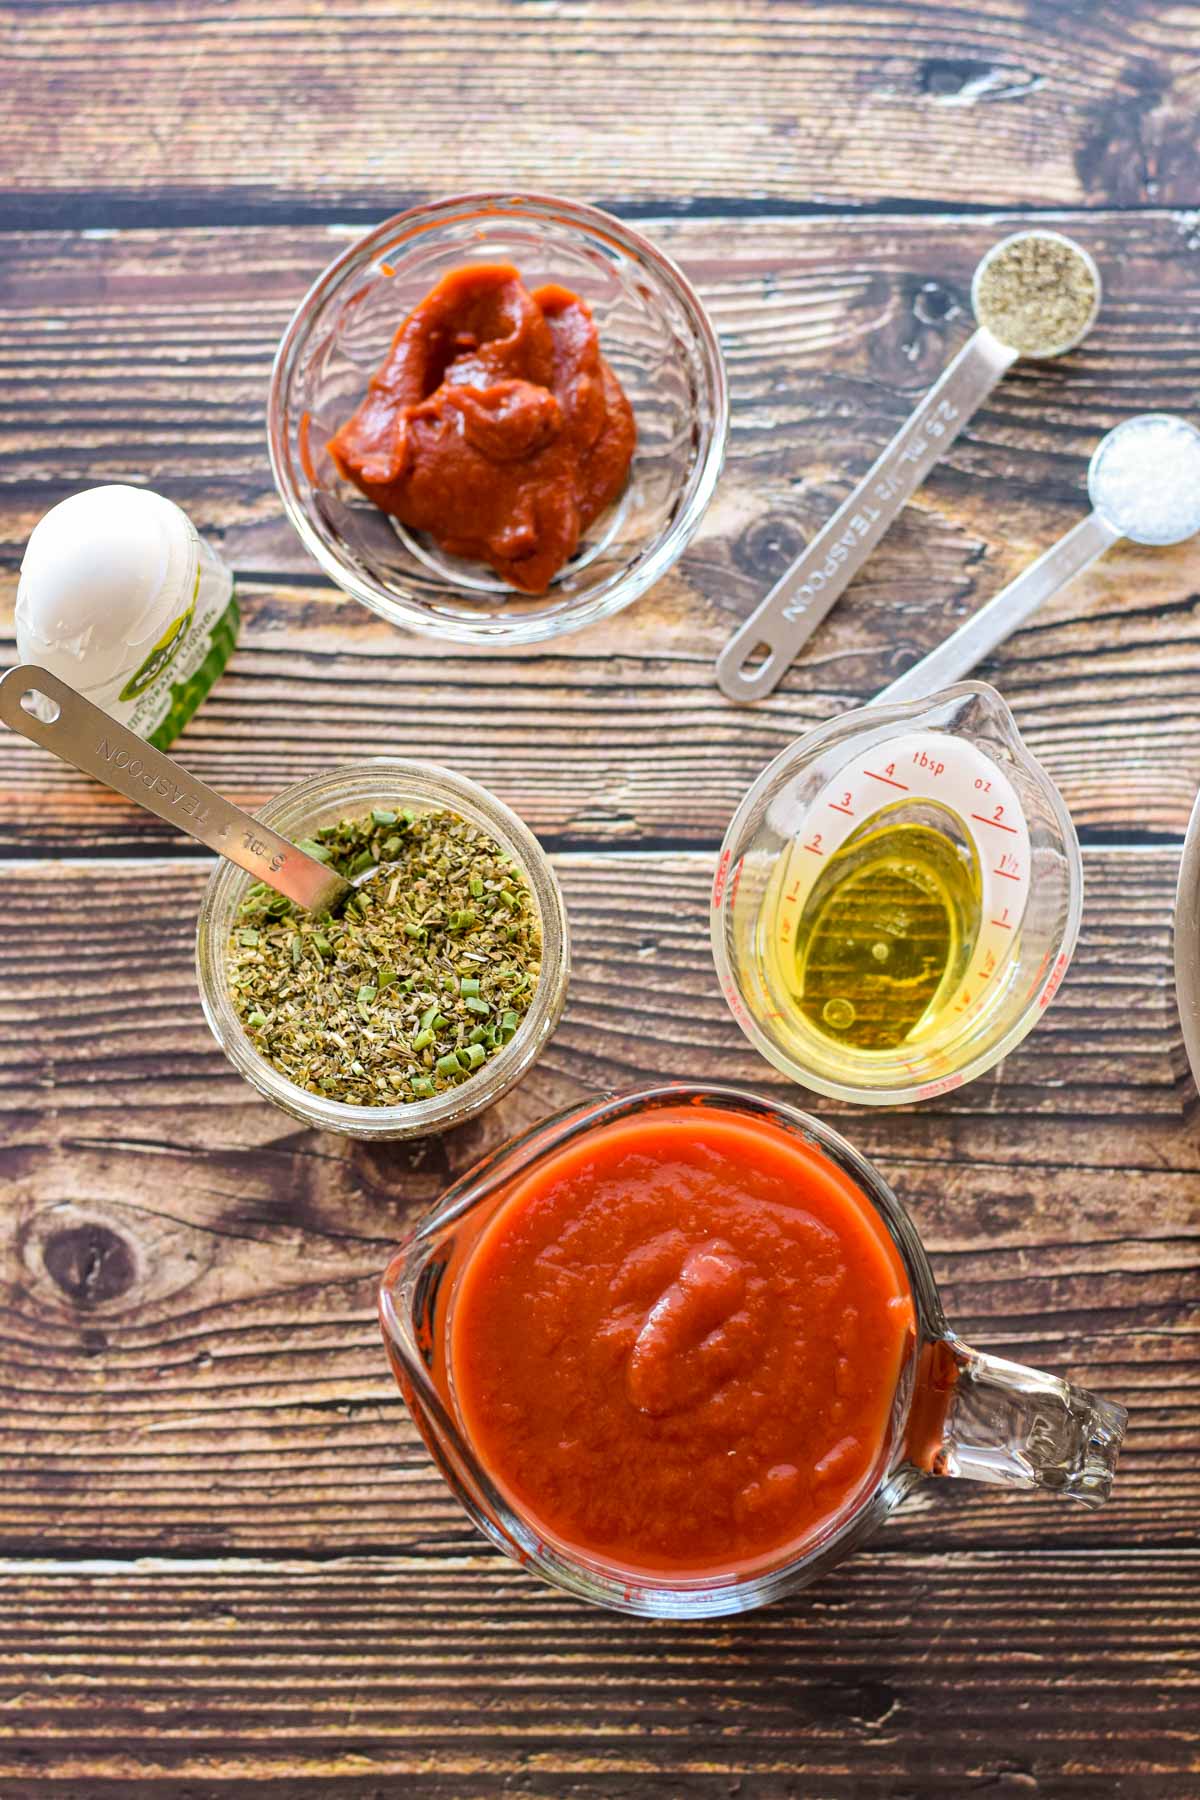 ingredinets of low FODMAP keto pizza sauce on a wooden background including strained tomatoes, garlic-infused olive oil, italian seasoning, salt, pepper, tomato paste, and stevia